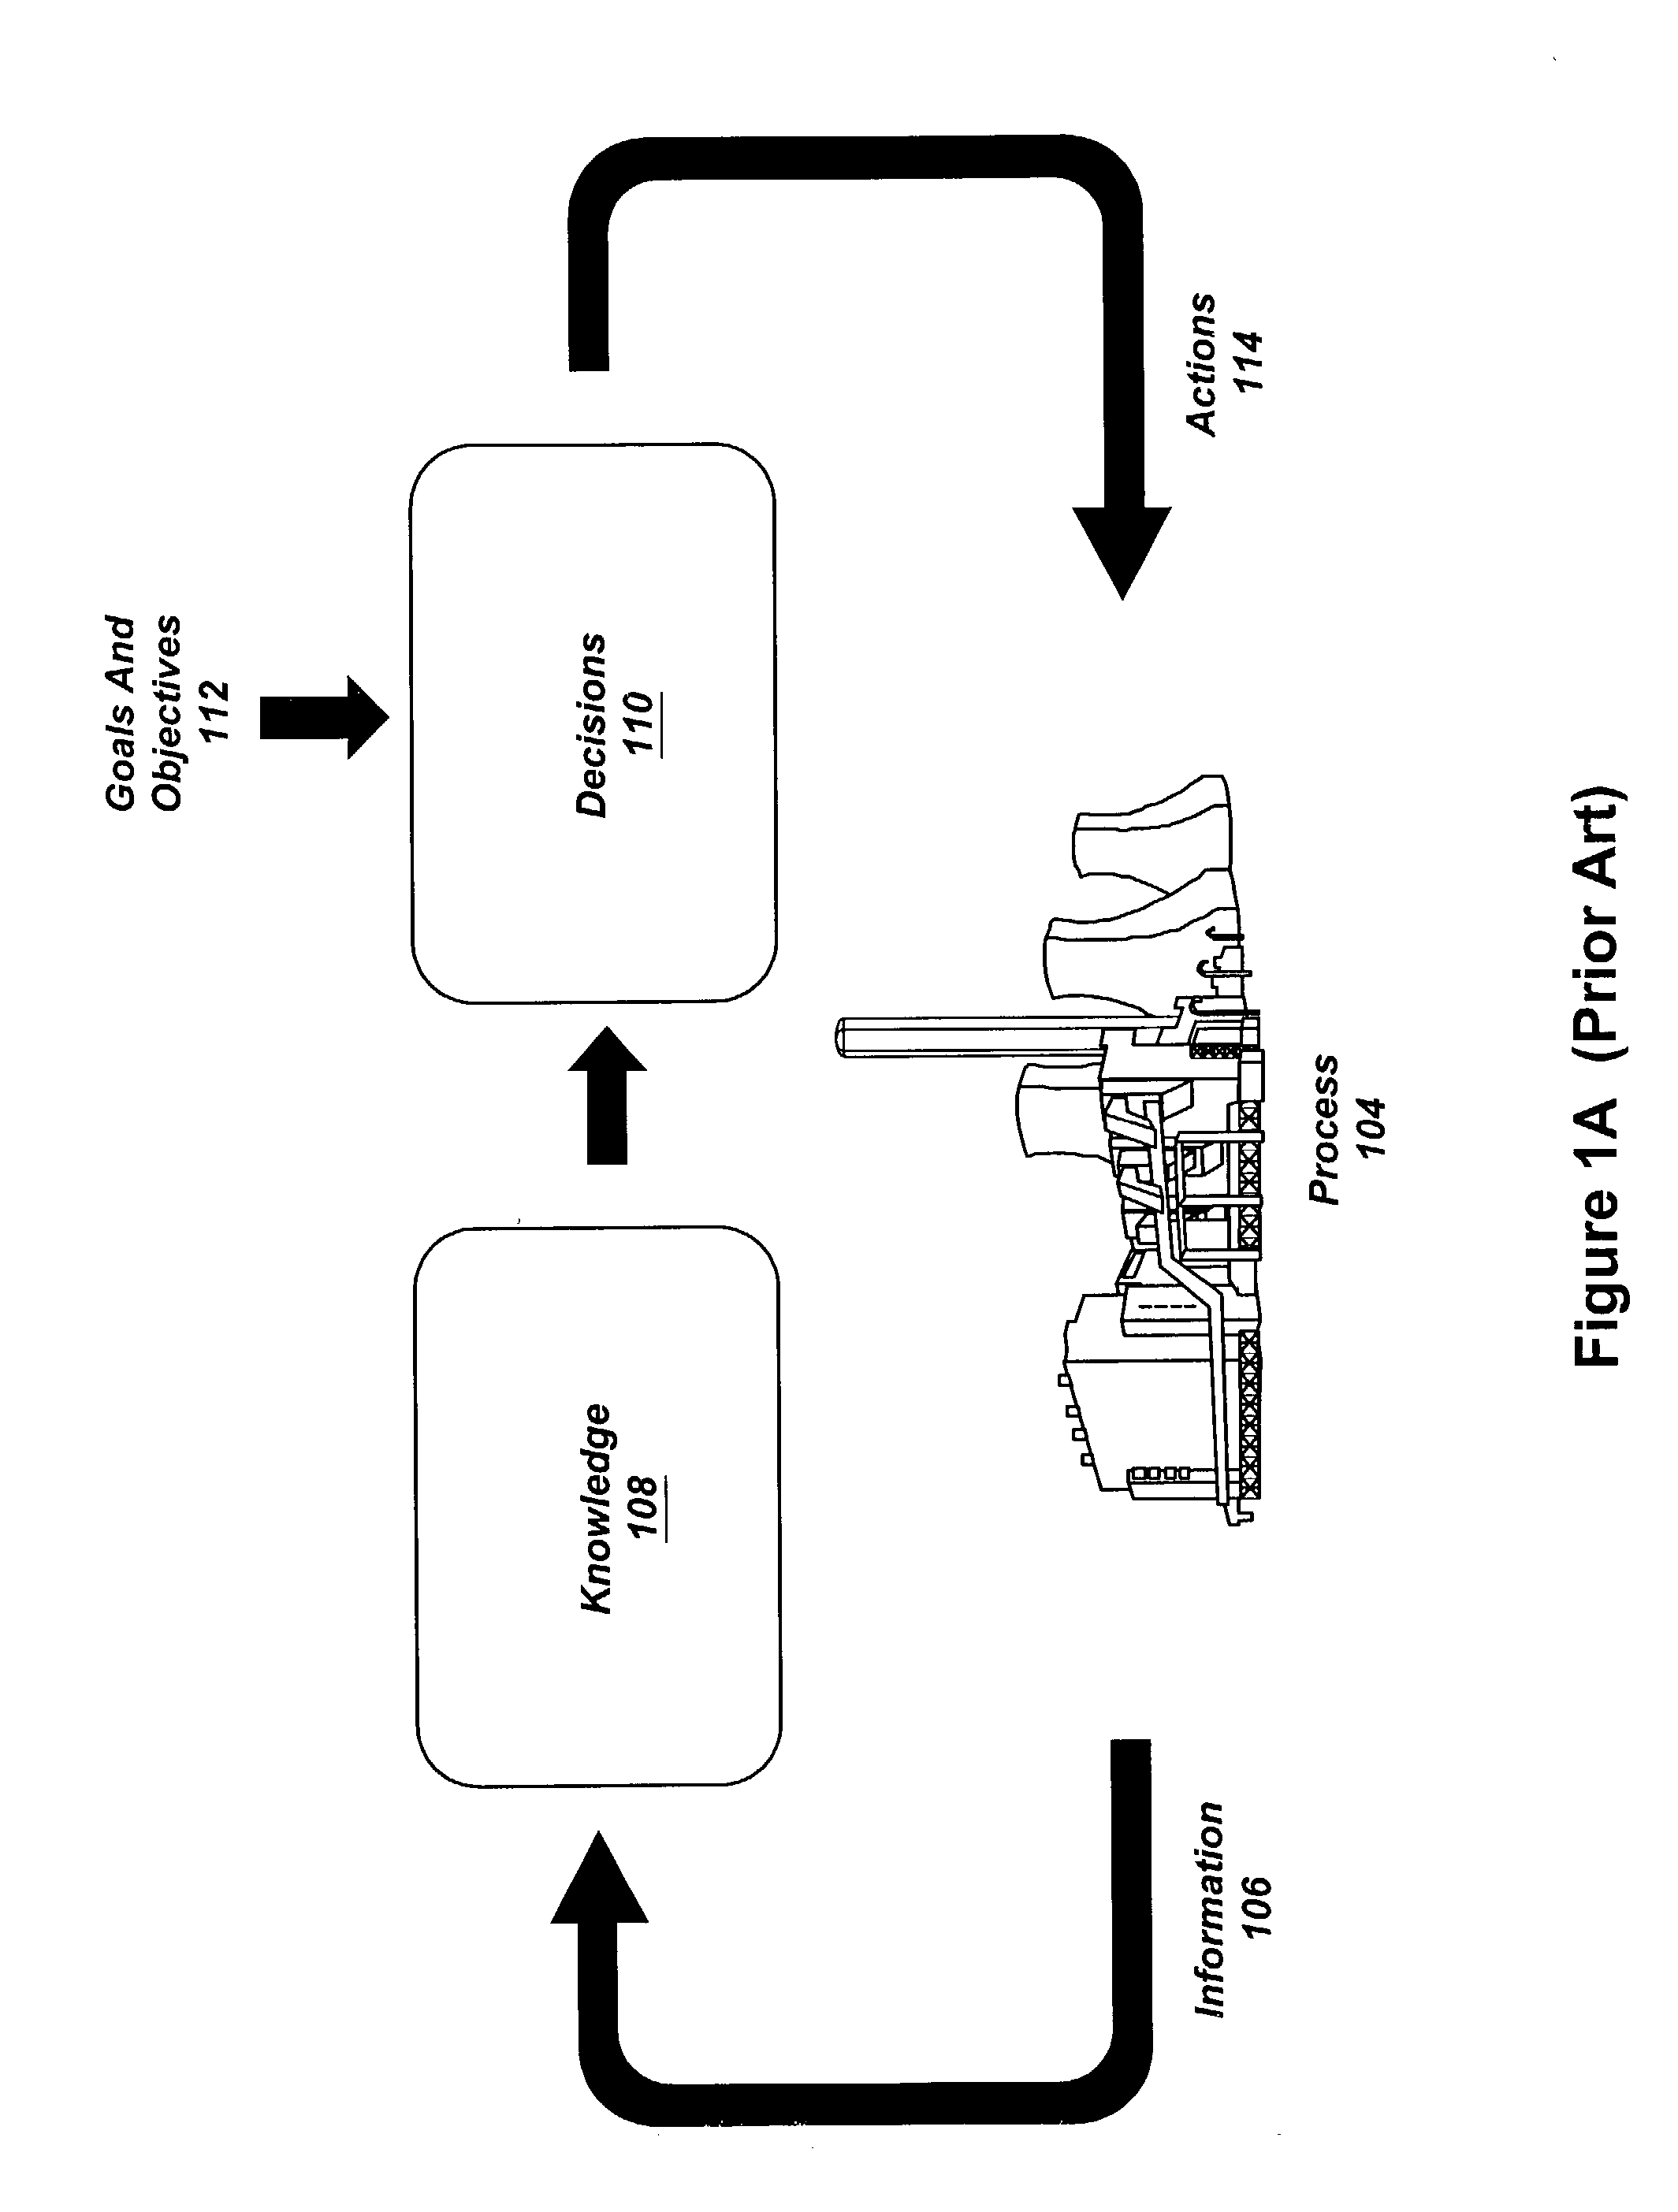 System and method for real-time enterprise optimization